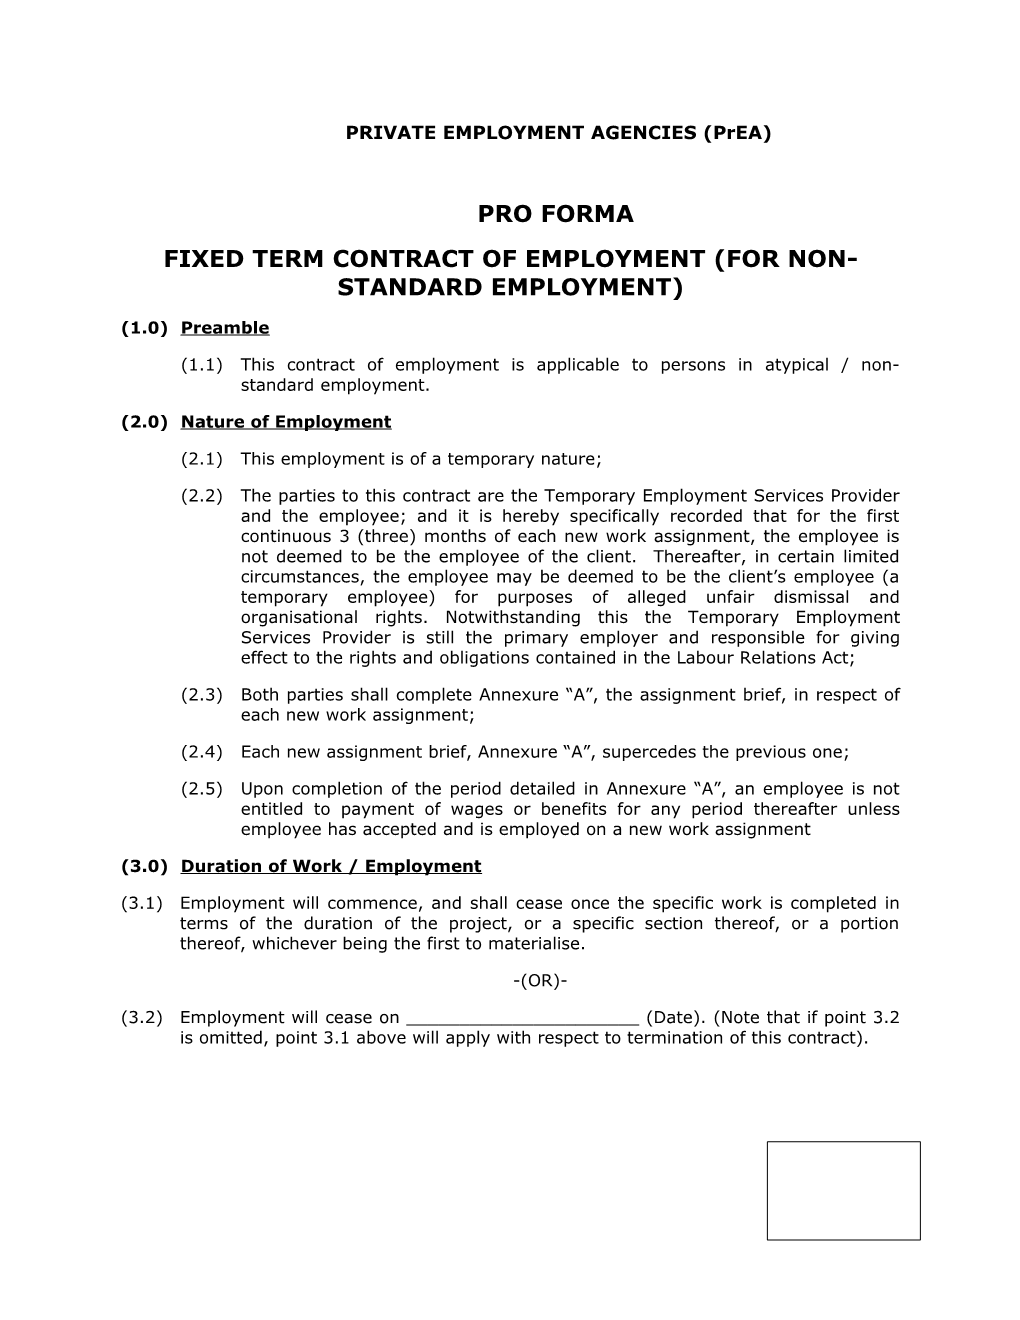 Fixed Term Contract of Employment (For Non-Standard Employment)